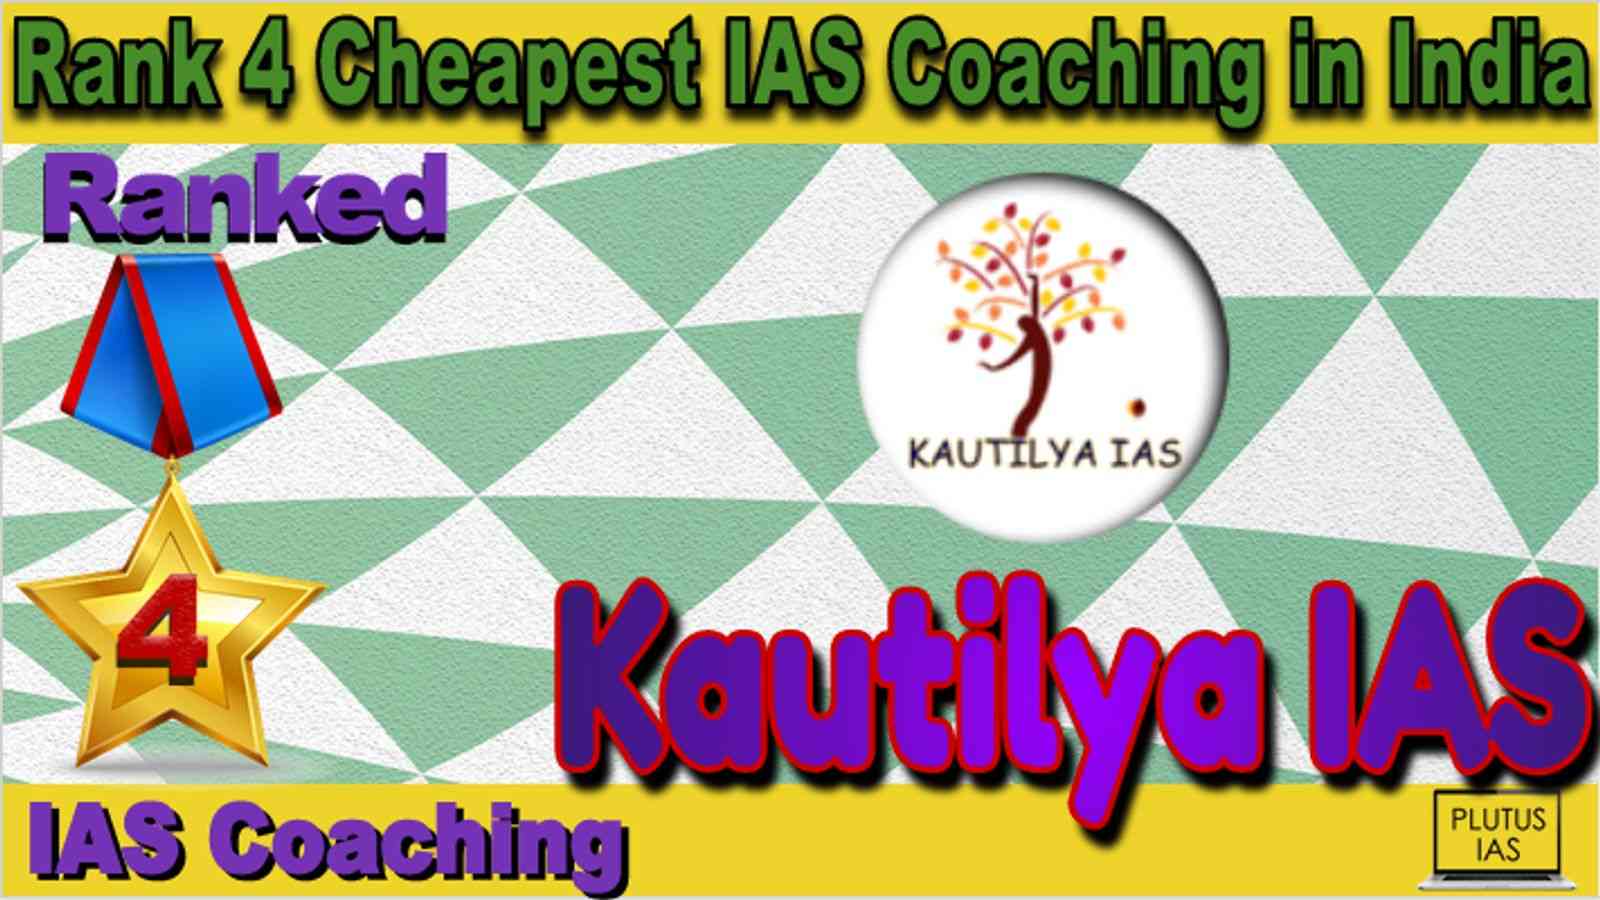 Rank 4 Cheapest IAS Coaching in India